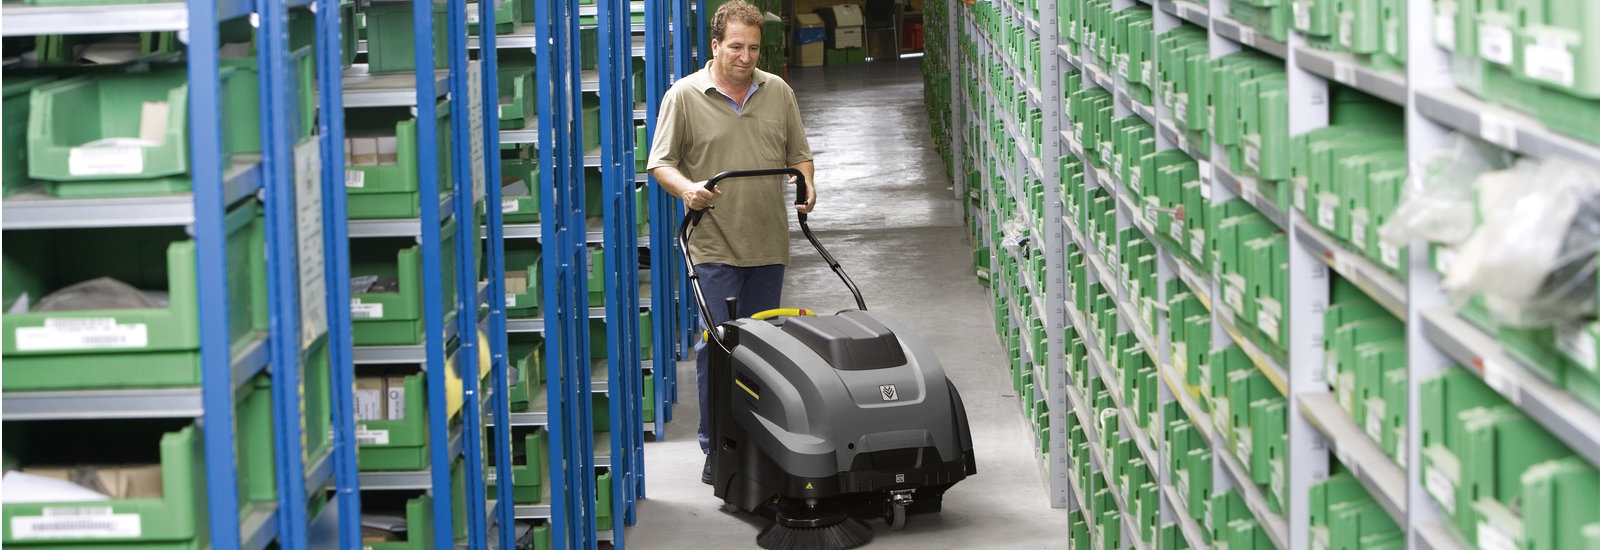 Warehouse Floor Cleaning by a Karcher scrubber dryer